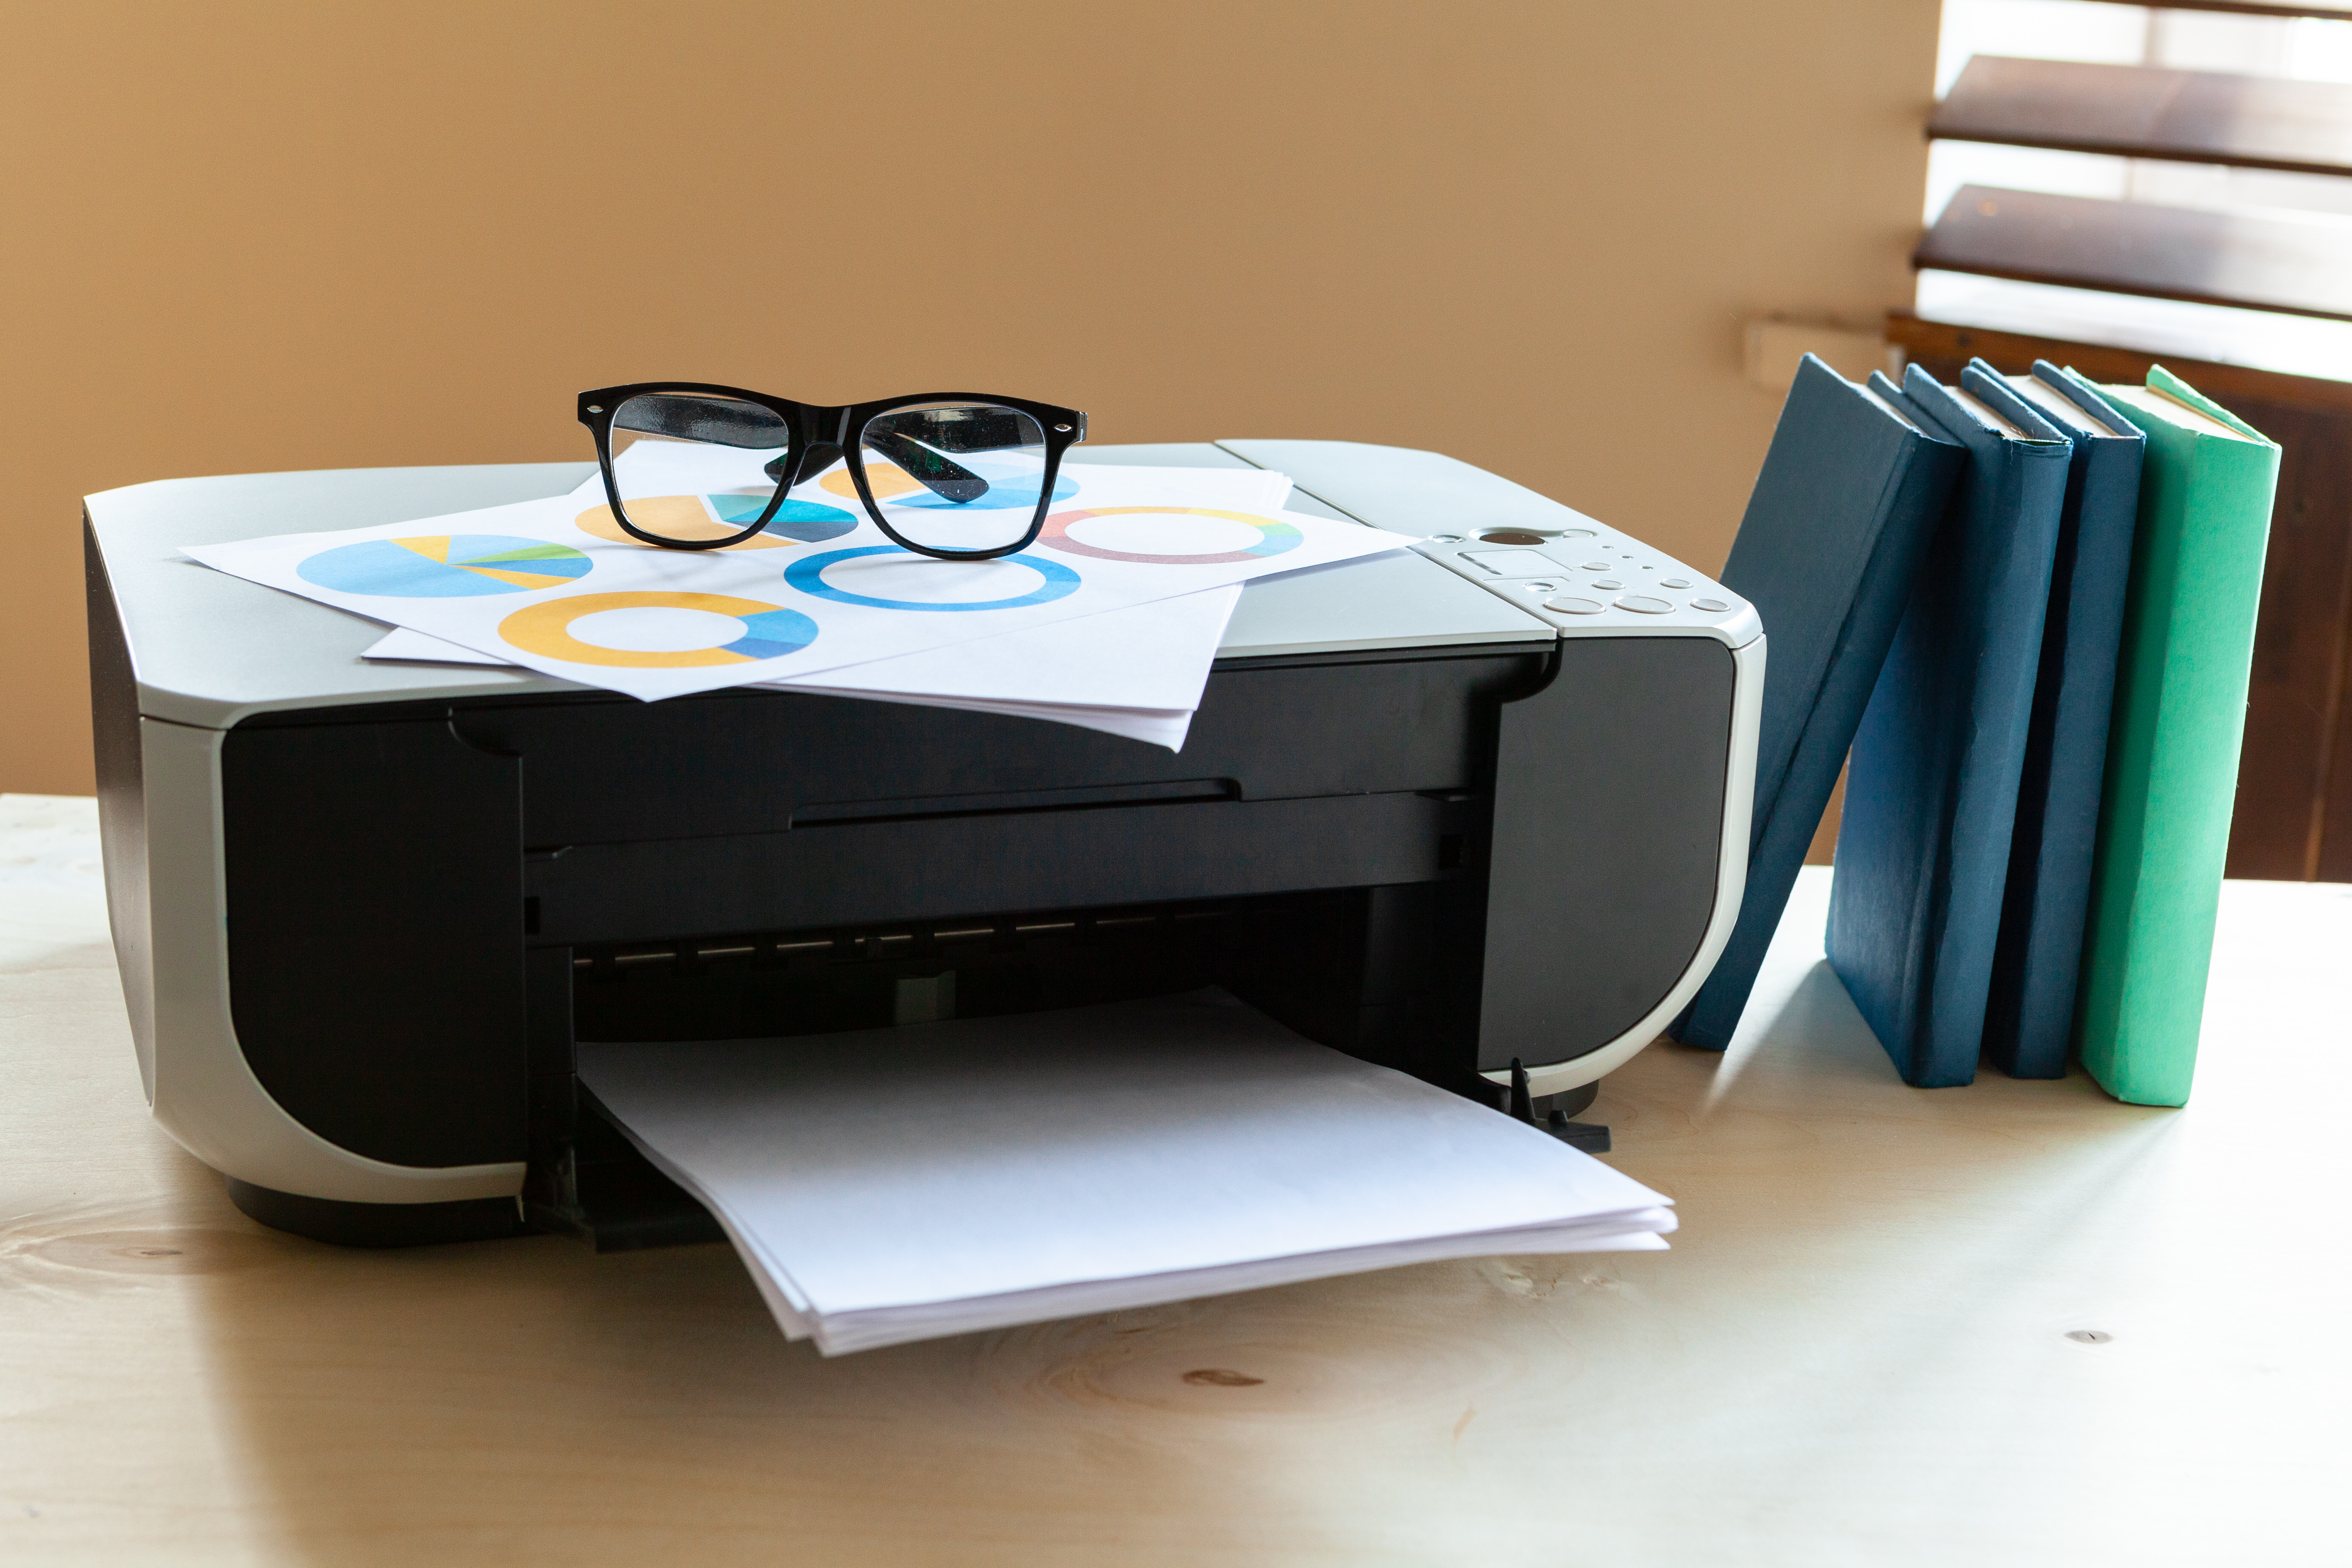 Optimizing Your Printer Settings for Superior Results